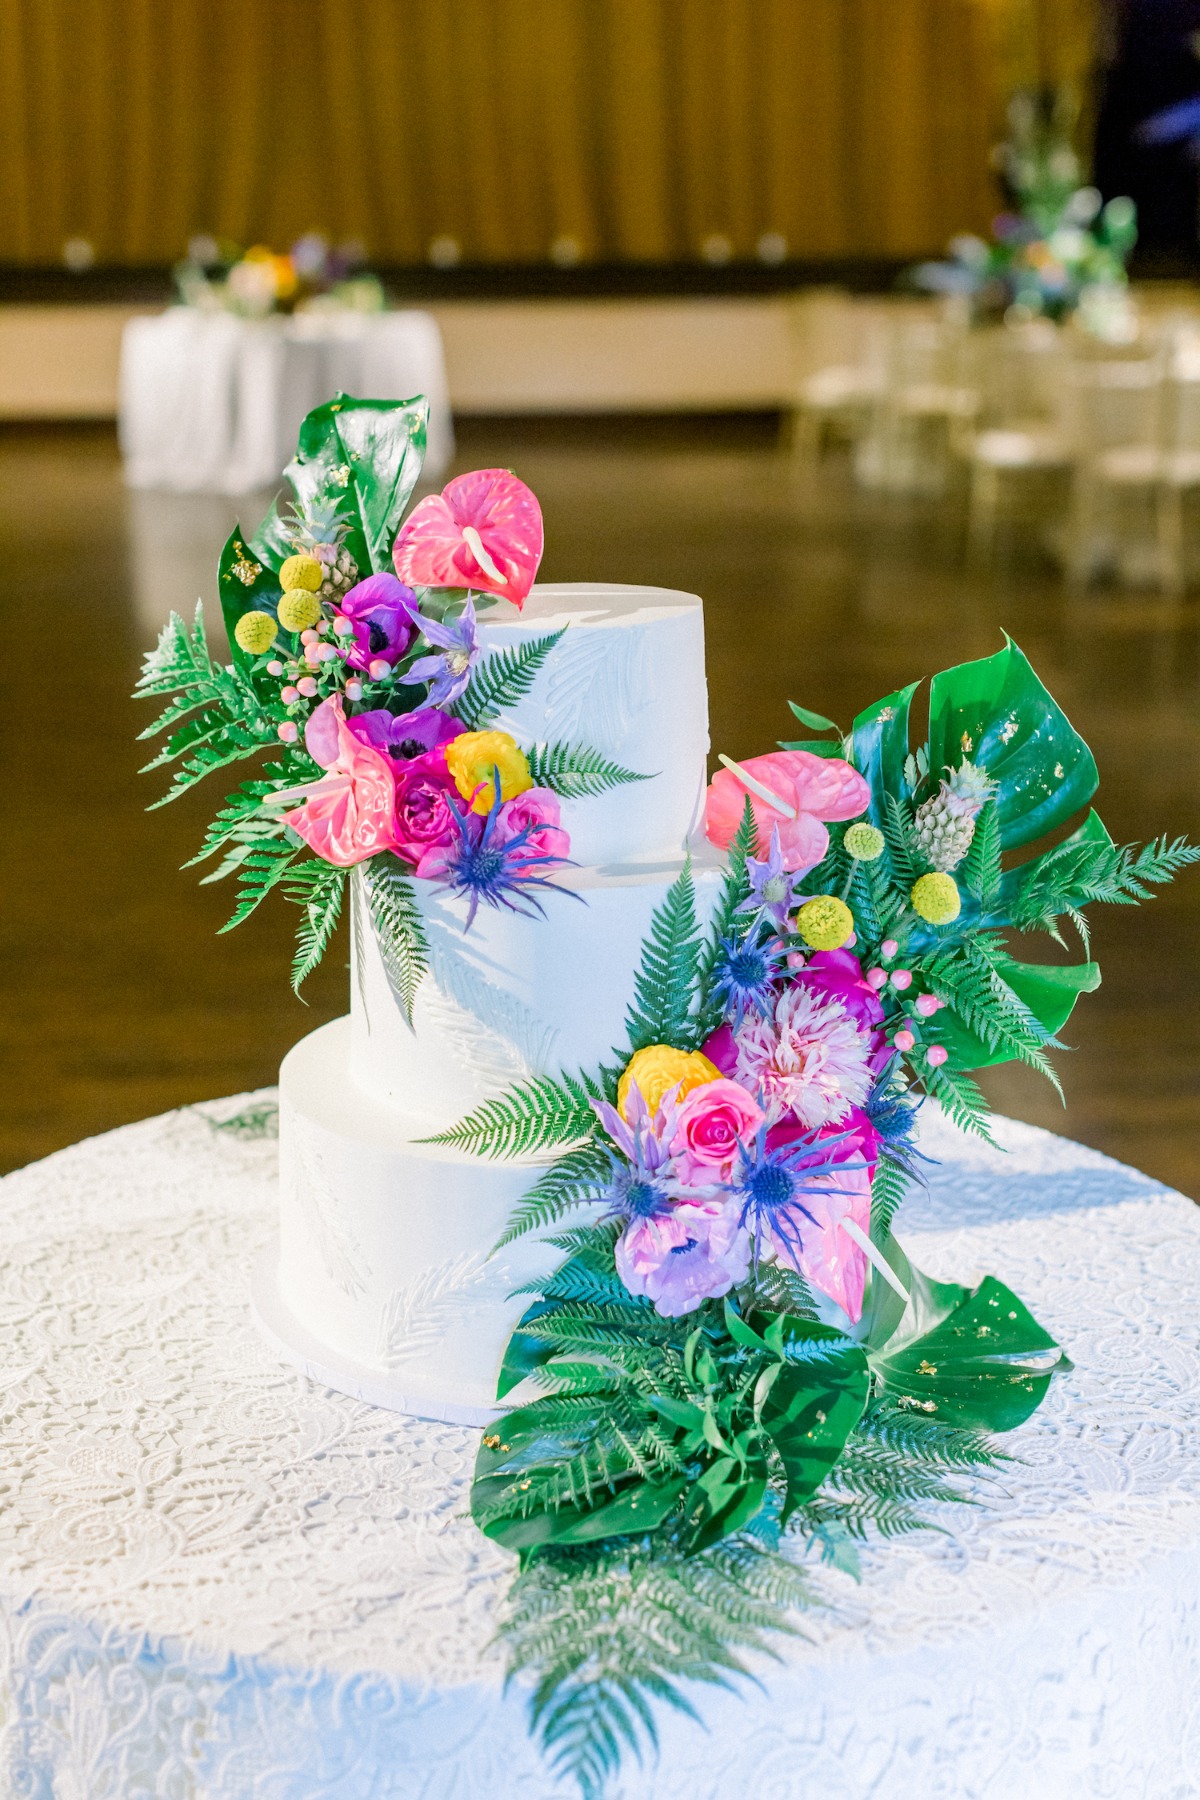 white wedding cake adorned with tropical flowers